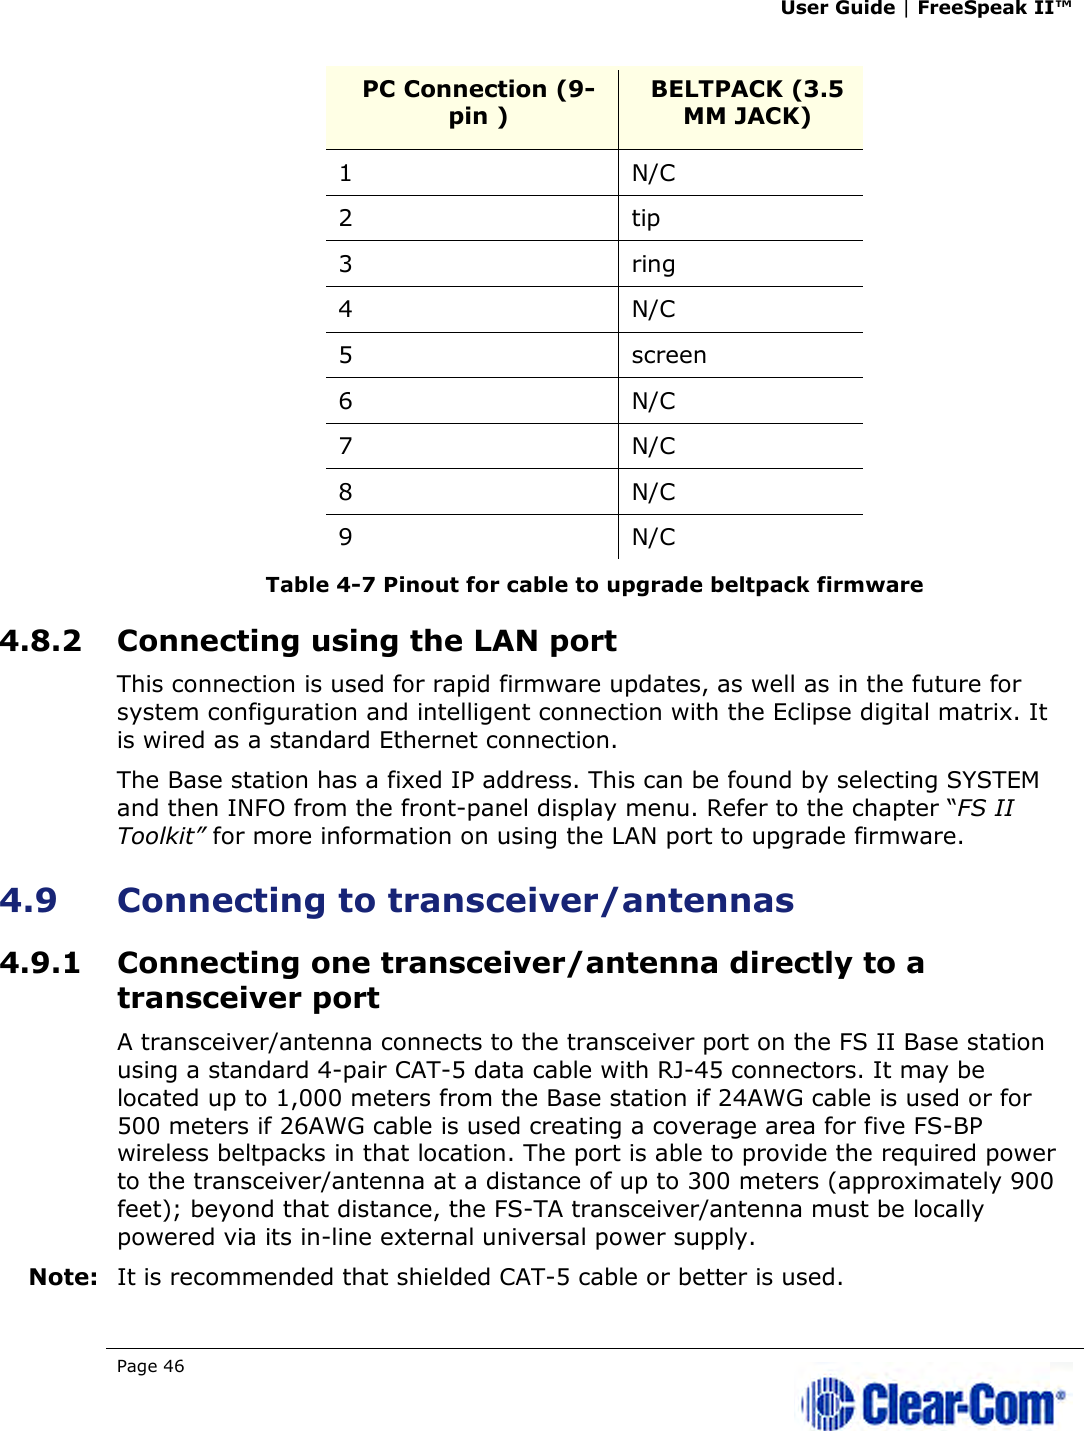 User Guide | FreeSpeak II™  Page 46   PC Connection (9-pin )  BELTPACK (3.5 MM JACK) 1  N/C 2  tip 3  ring 4  N/C 5  screen 6  N/C 7  N/C 8  N/C 9  N/C Table 4-7 Pinout for cable to upgrade beltpack firmware 4.8.2 Connecting using the LAN port This connection is used for rapid firmware updates, as well as in the future for system configuration and intelligent connection with the Eclipse digital matrix. It is wired as a standard Ethernet connection.  The Base station has a fixed IP address. This can be found by selecting SYSTEM and then INFO from the front-panel display menu. Refer to the chapter “FS II Toolkit” for more information on using the LAN port to upgrade firmware.  4.9 Connecting to transceiver/antennas 4.9.1 Connecting one transceiver/antenna directly to a transceiver port A transceiver/antenna connects to the transceiver port on the FS II Base station using a standard 4-pair CAT-5 data cable with RJ-45 connectors. It may be located up to 1,000 meters from the Base station if 24AWG cable is used or for 500 meters if 26AWG cable is used creating a coverage area for five FS-BP wireless beltpacks in that location. The port is able to provide the required power to the transceiver/antenna at a distance of up to 300 meters (approximately 900 feet); beyond that distance, the FS-TA transceiver/antenna must be locally powered via its in-line external universal power supply. Note: It is recommended that shielded CAT-5 cable or better is used. 